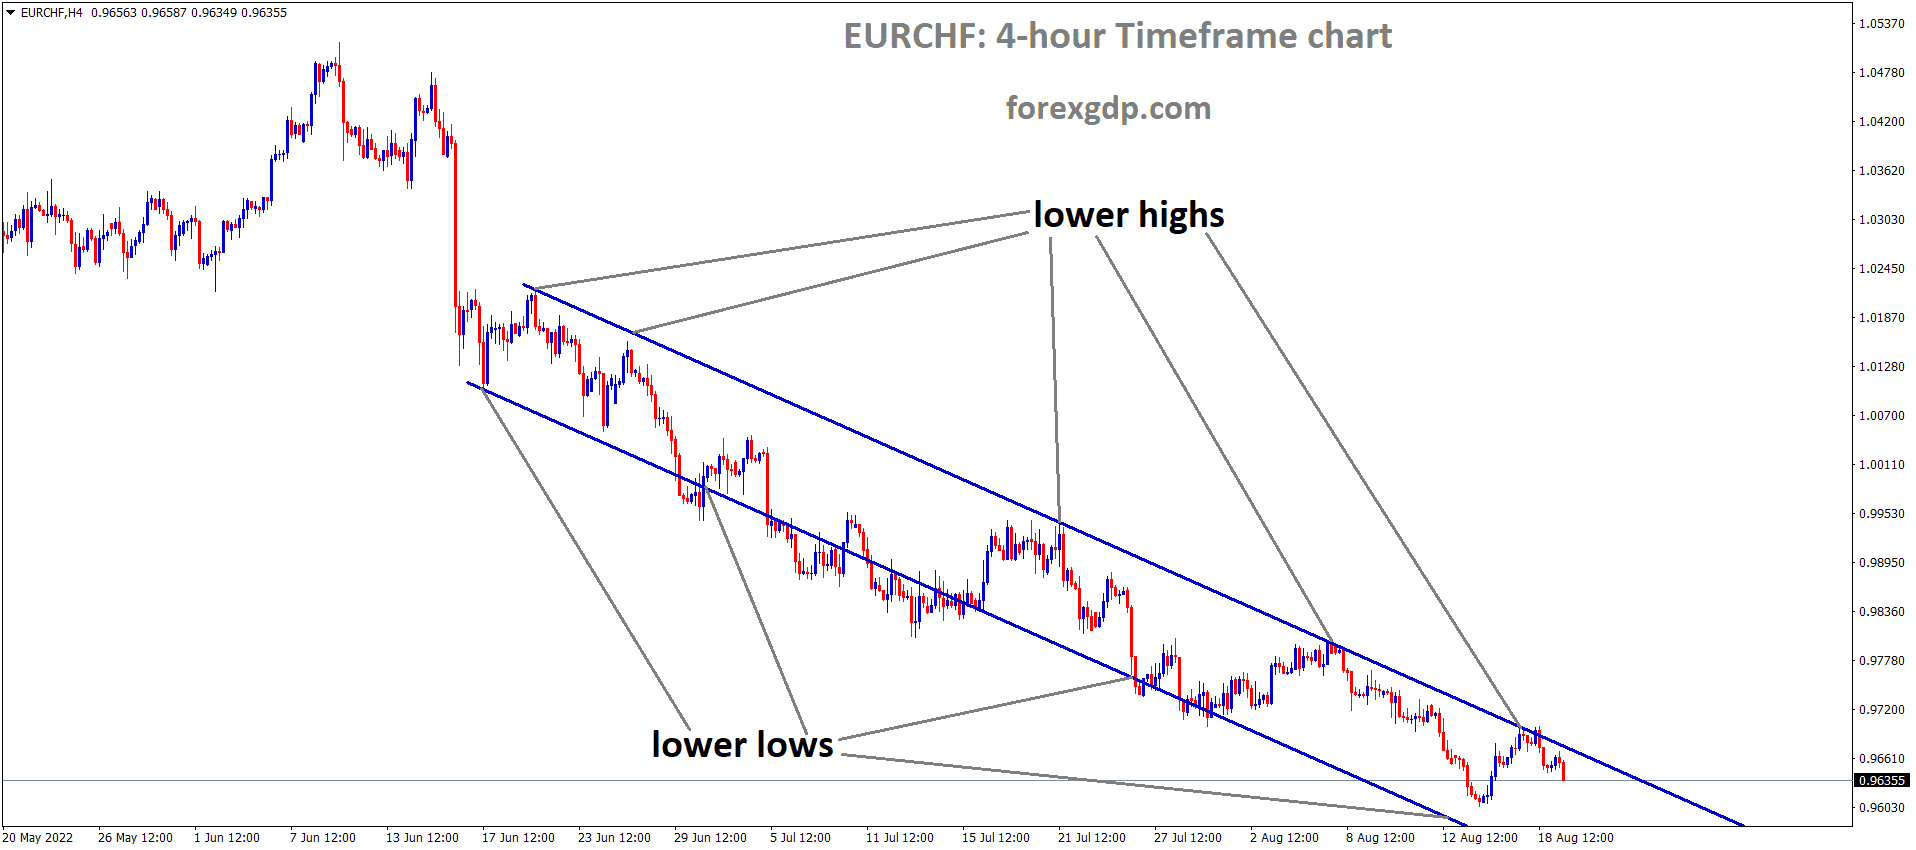 EURCHF is moving in the Descending channel and the market has fallen from the lower high area of the channel 1